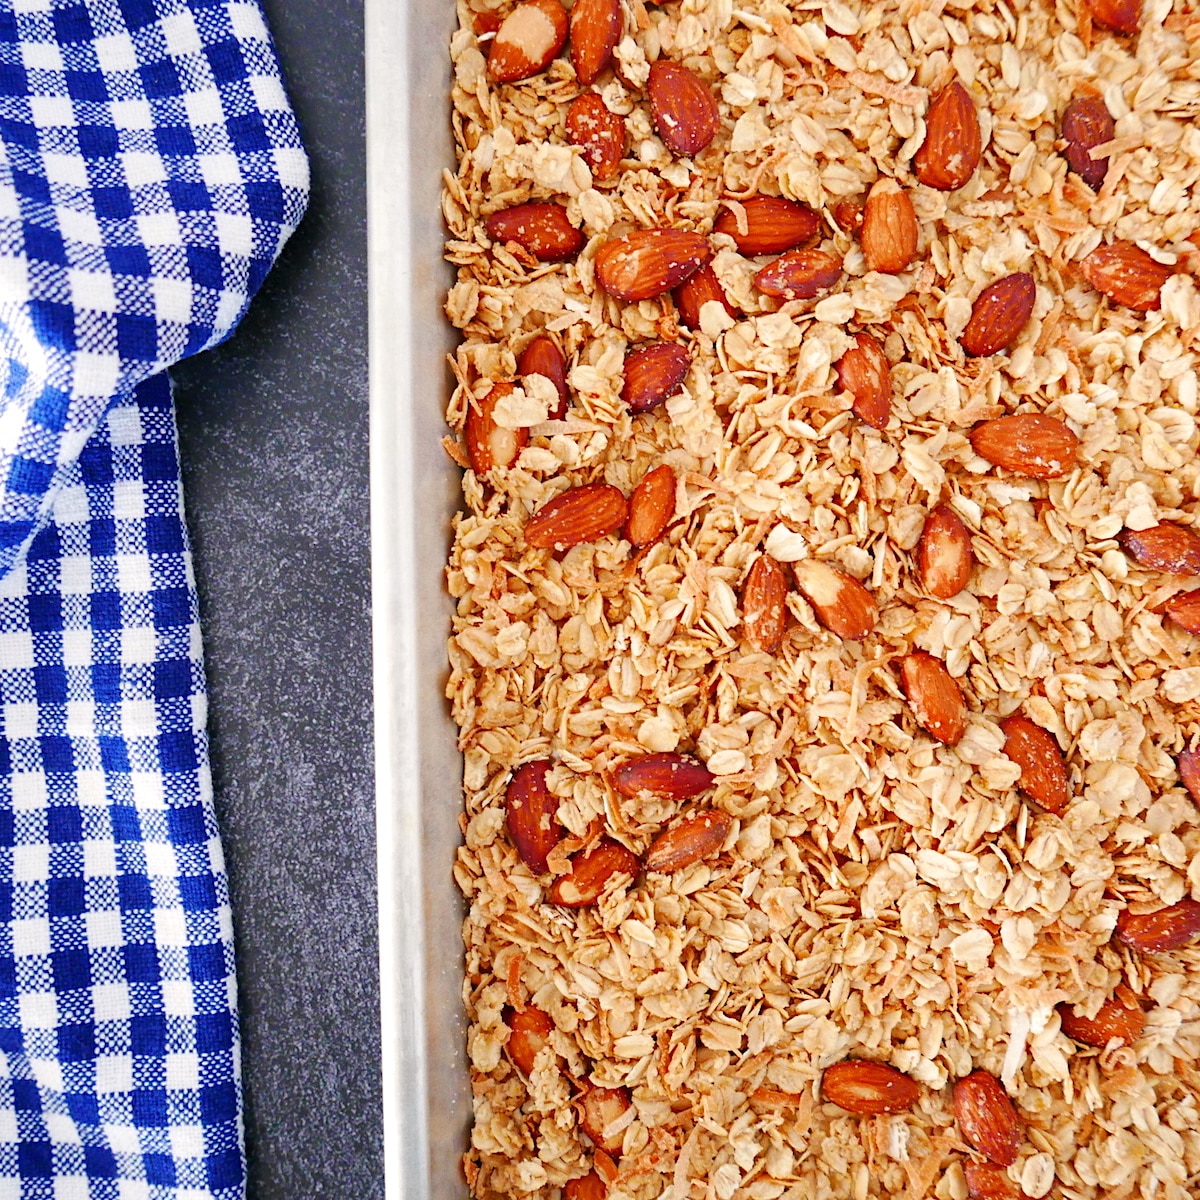 Pan of granola on a baking sheet with a checkered dish towel.